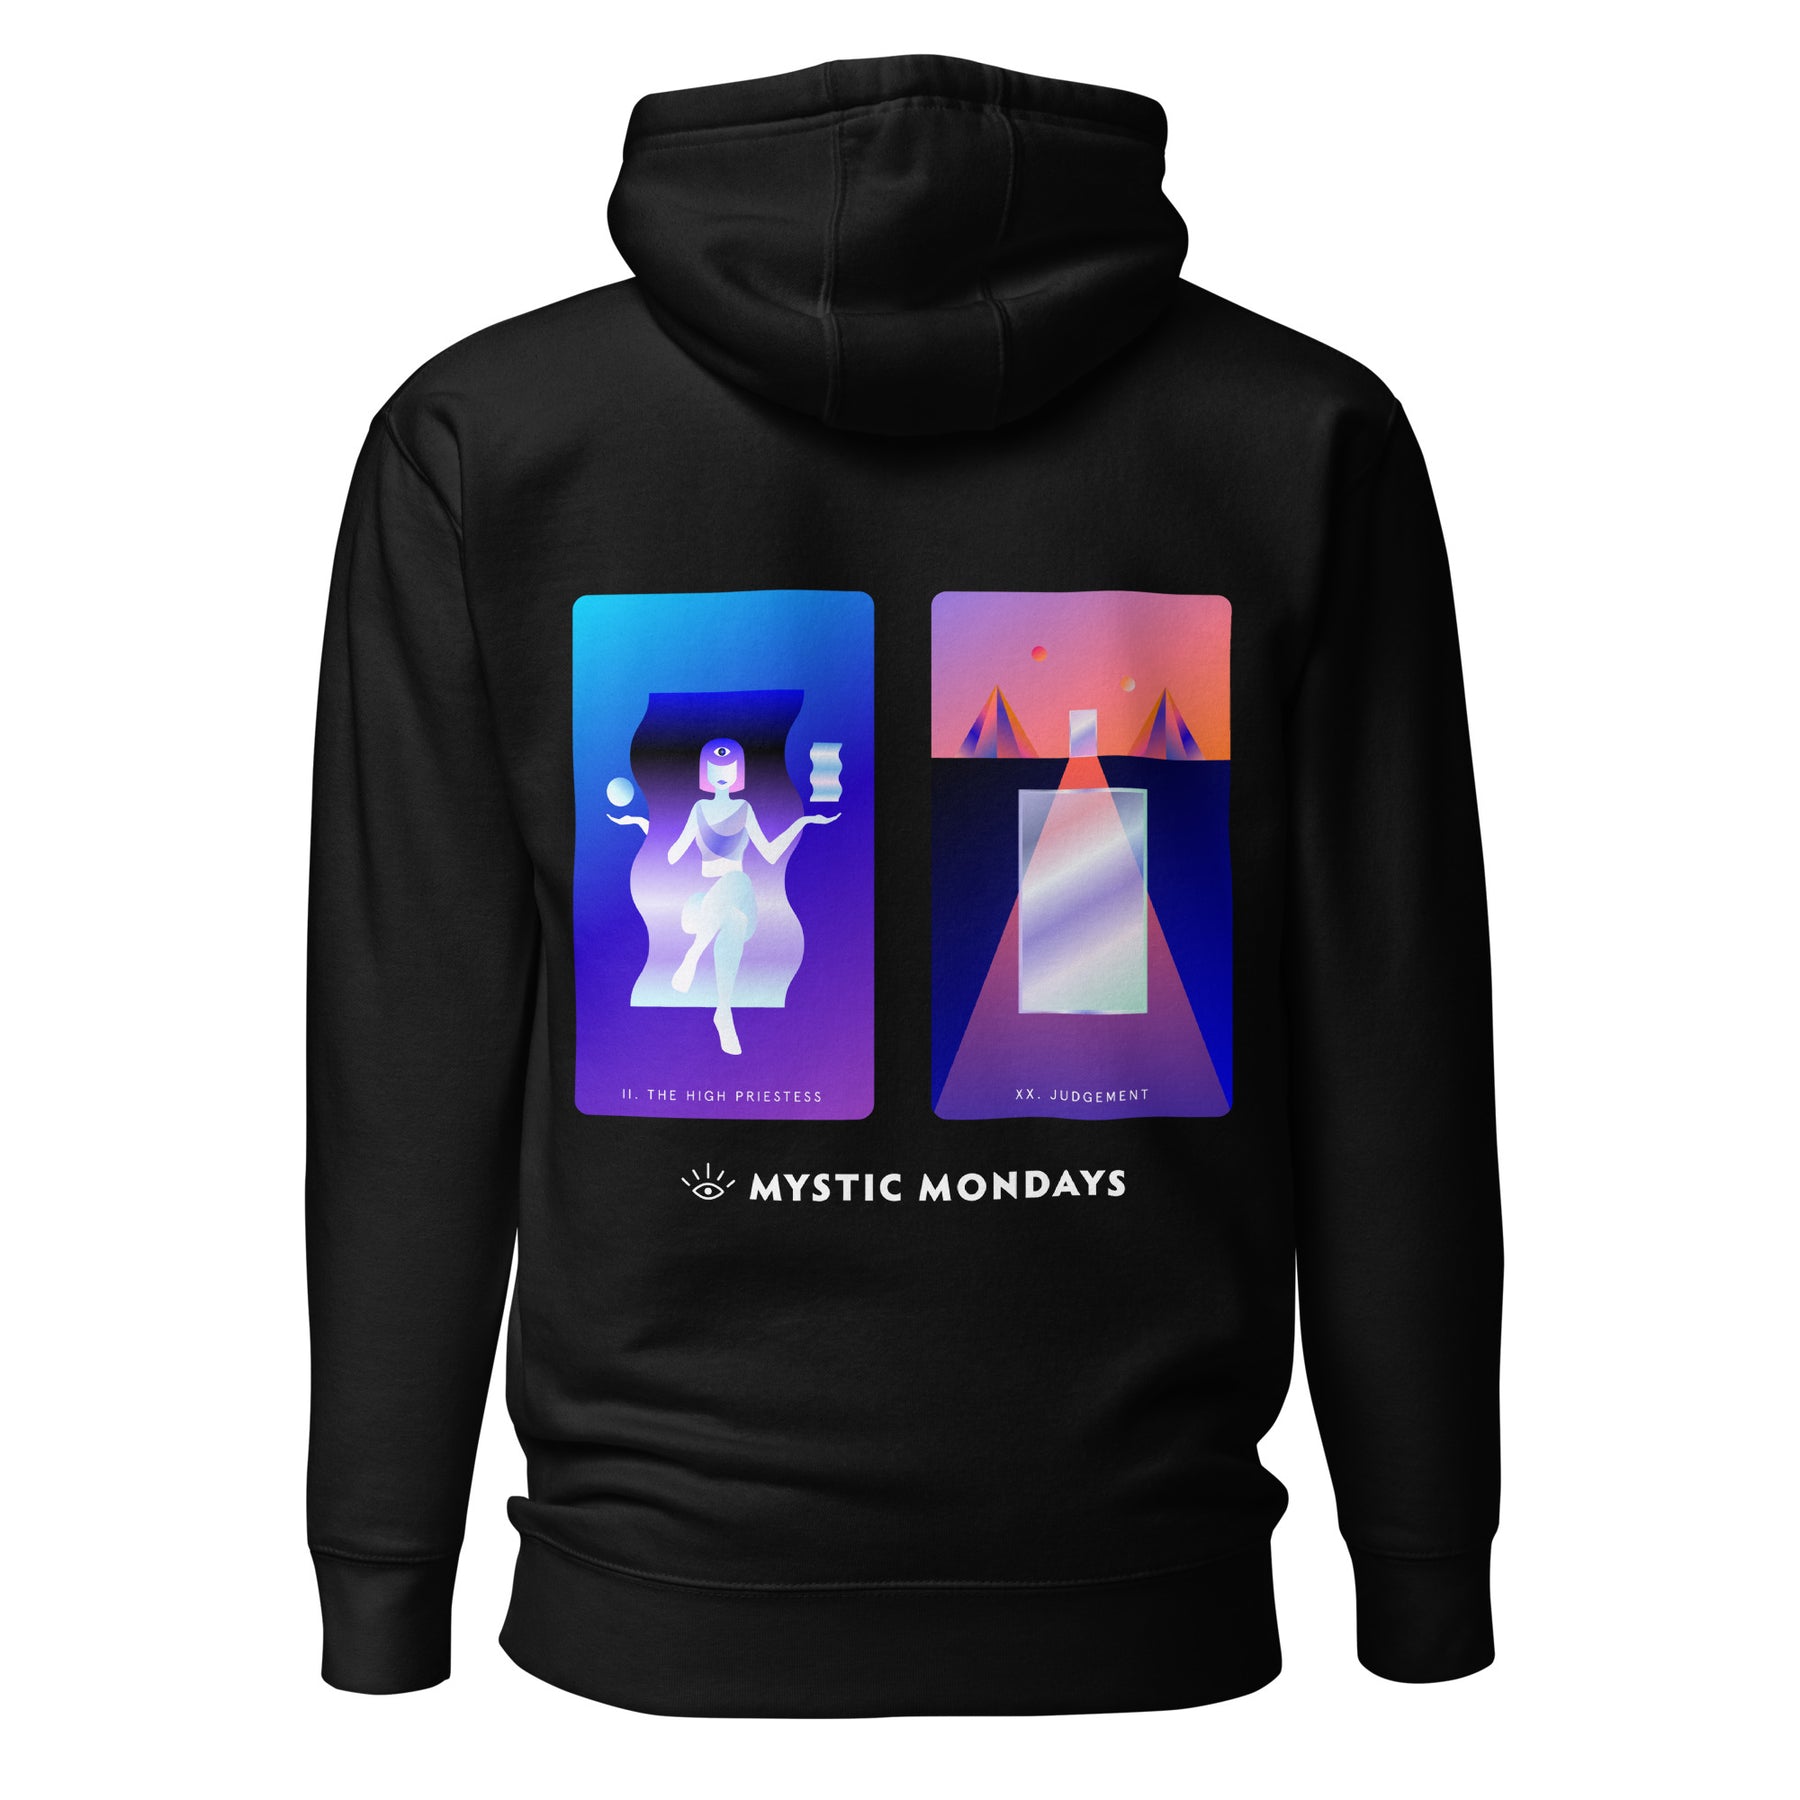 The High Priestess and Judgement Hoodie